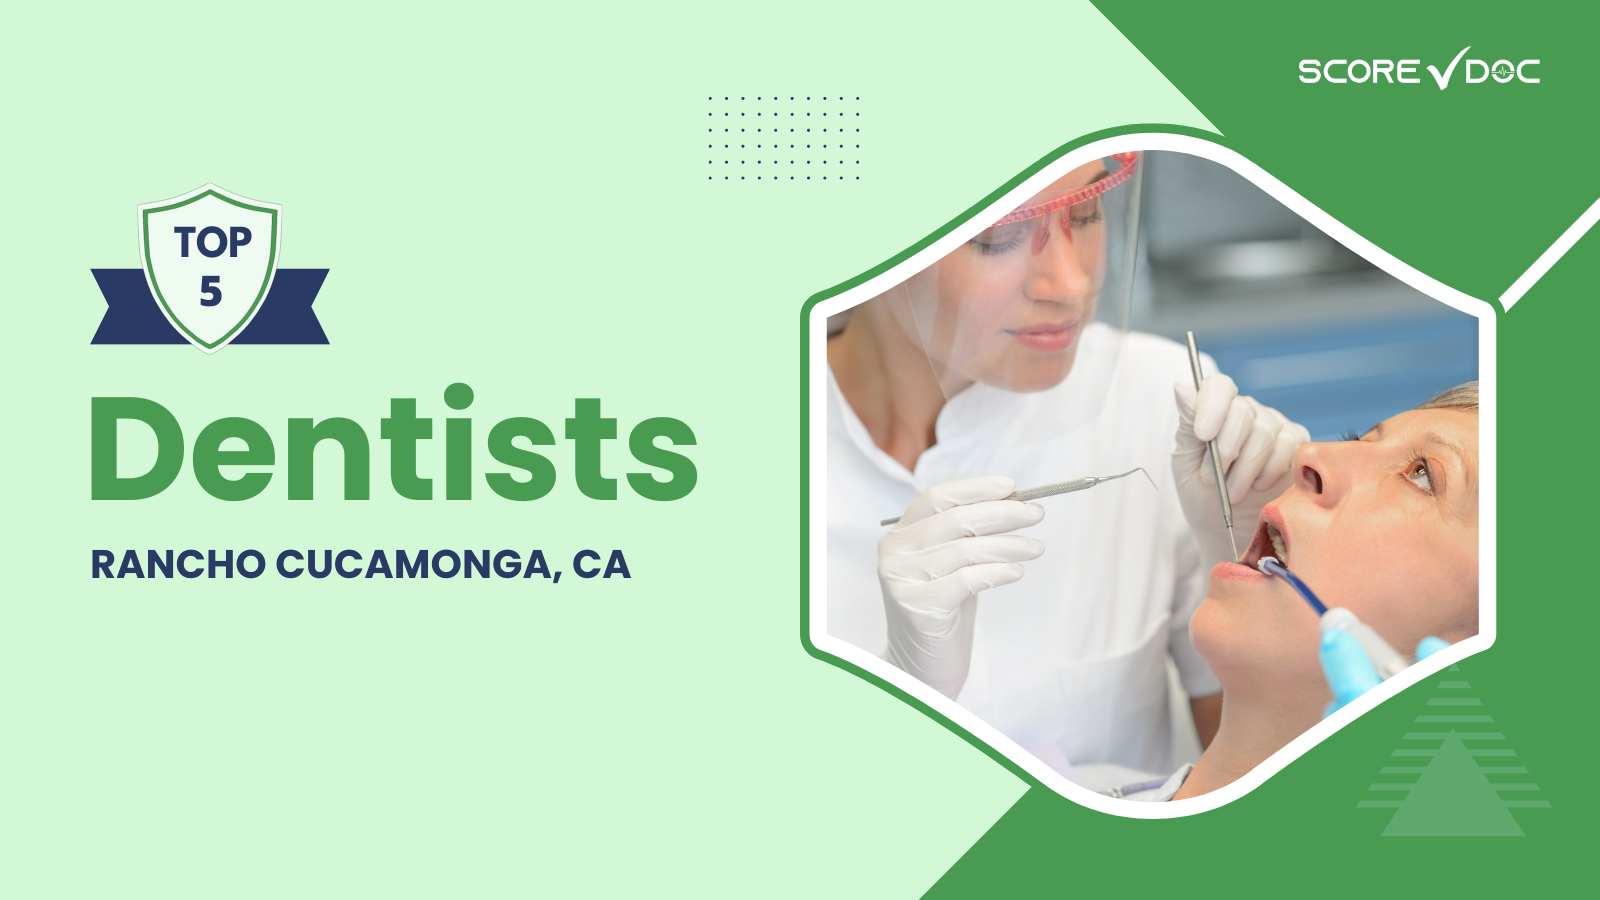 5 Top-Rated Dentists in Rancho Cucamonga, California